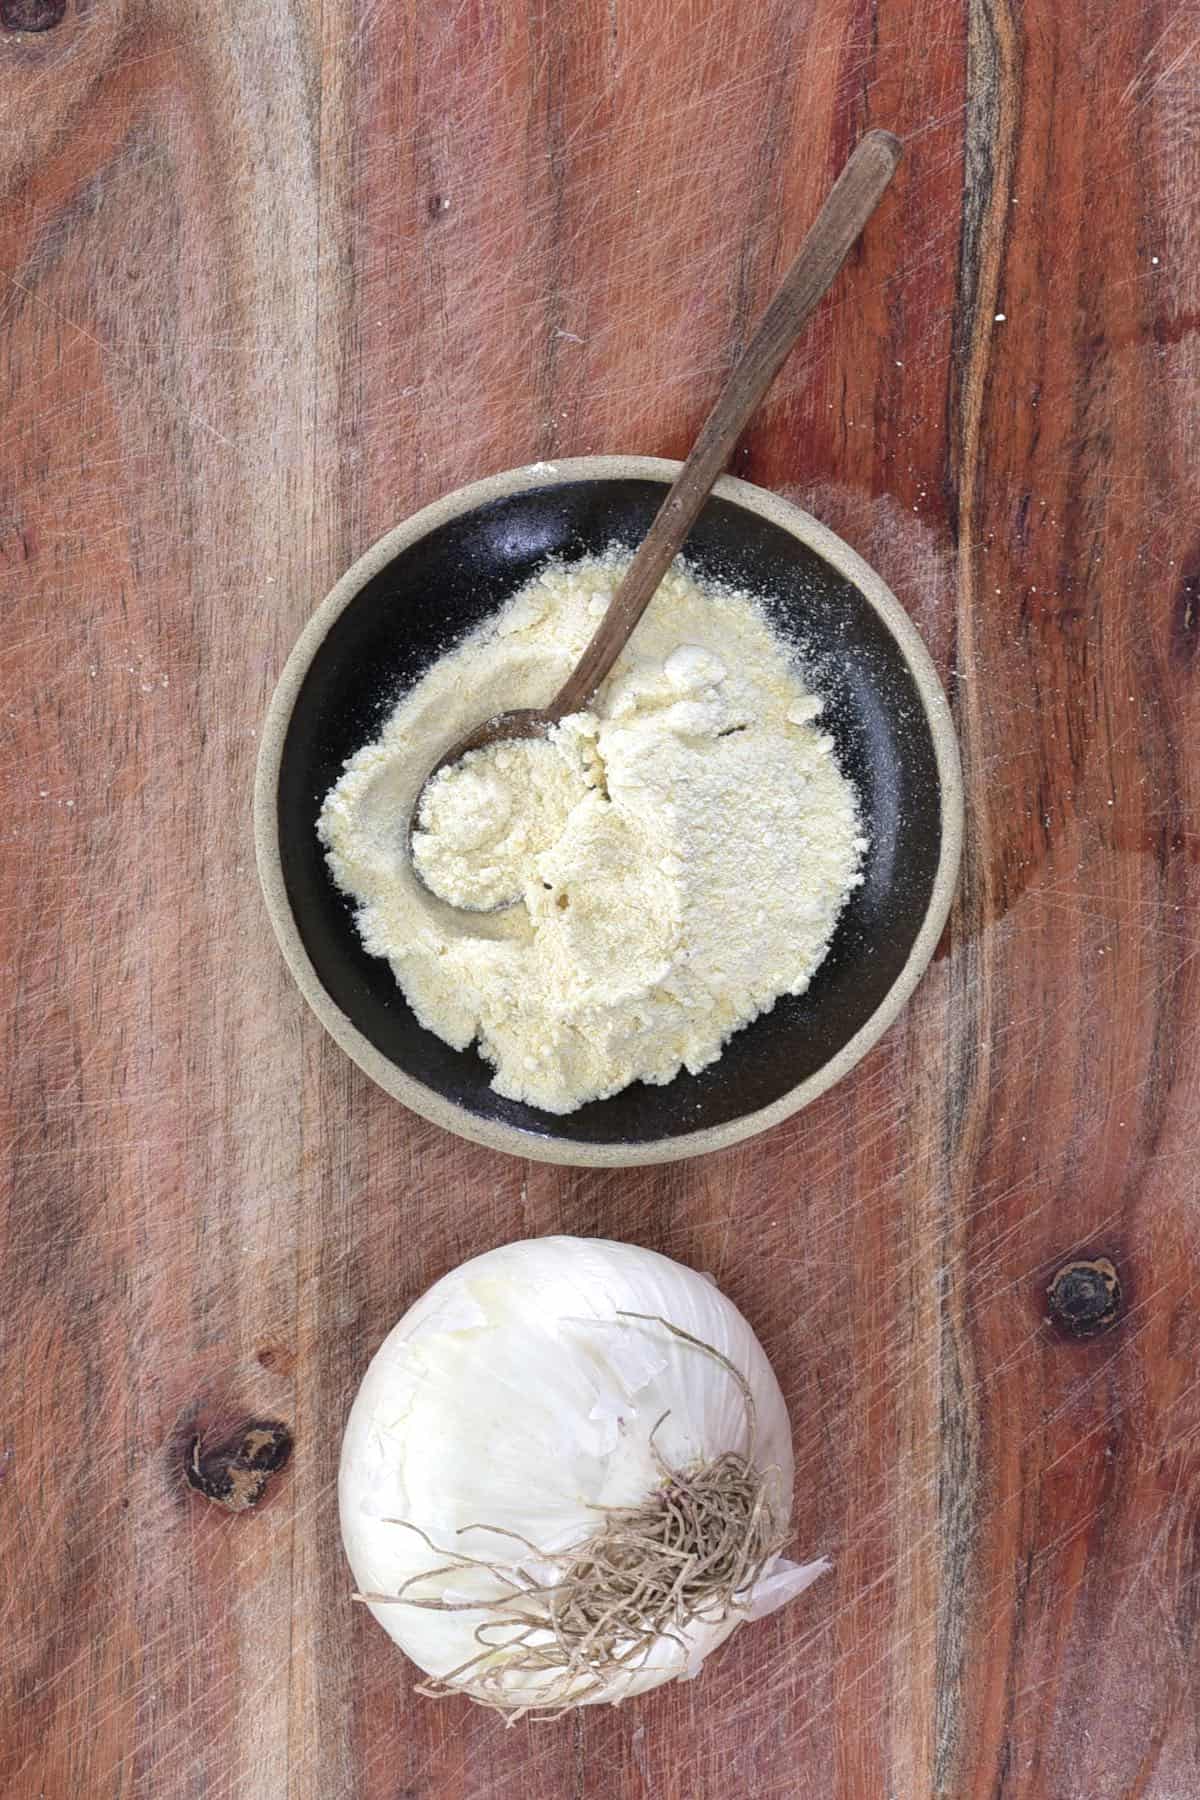 Onion powder in a small bowl and an onion